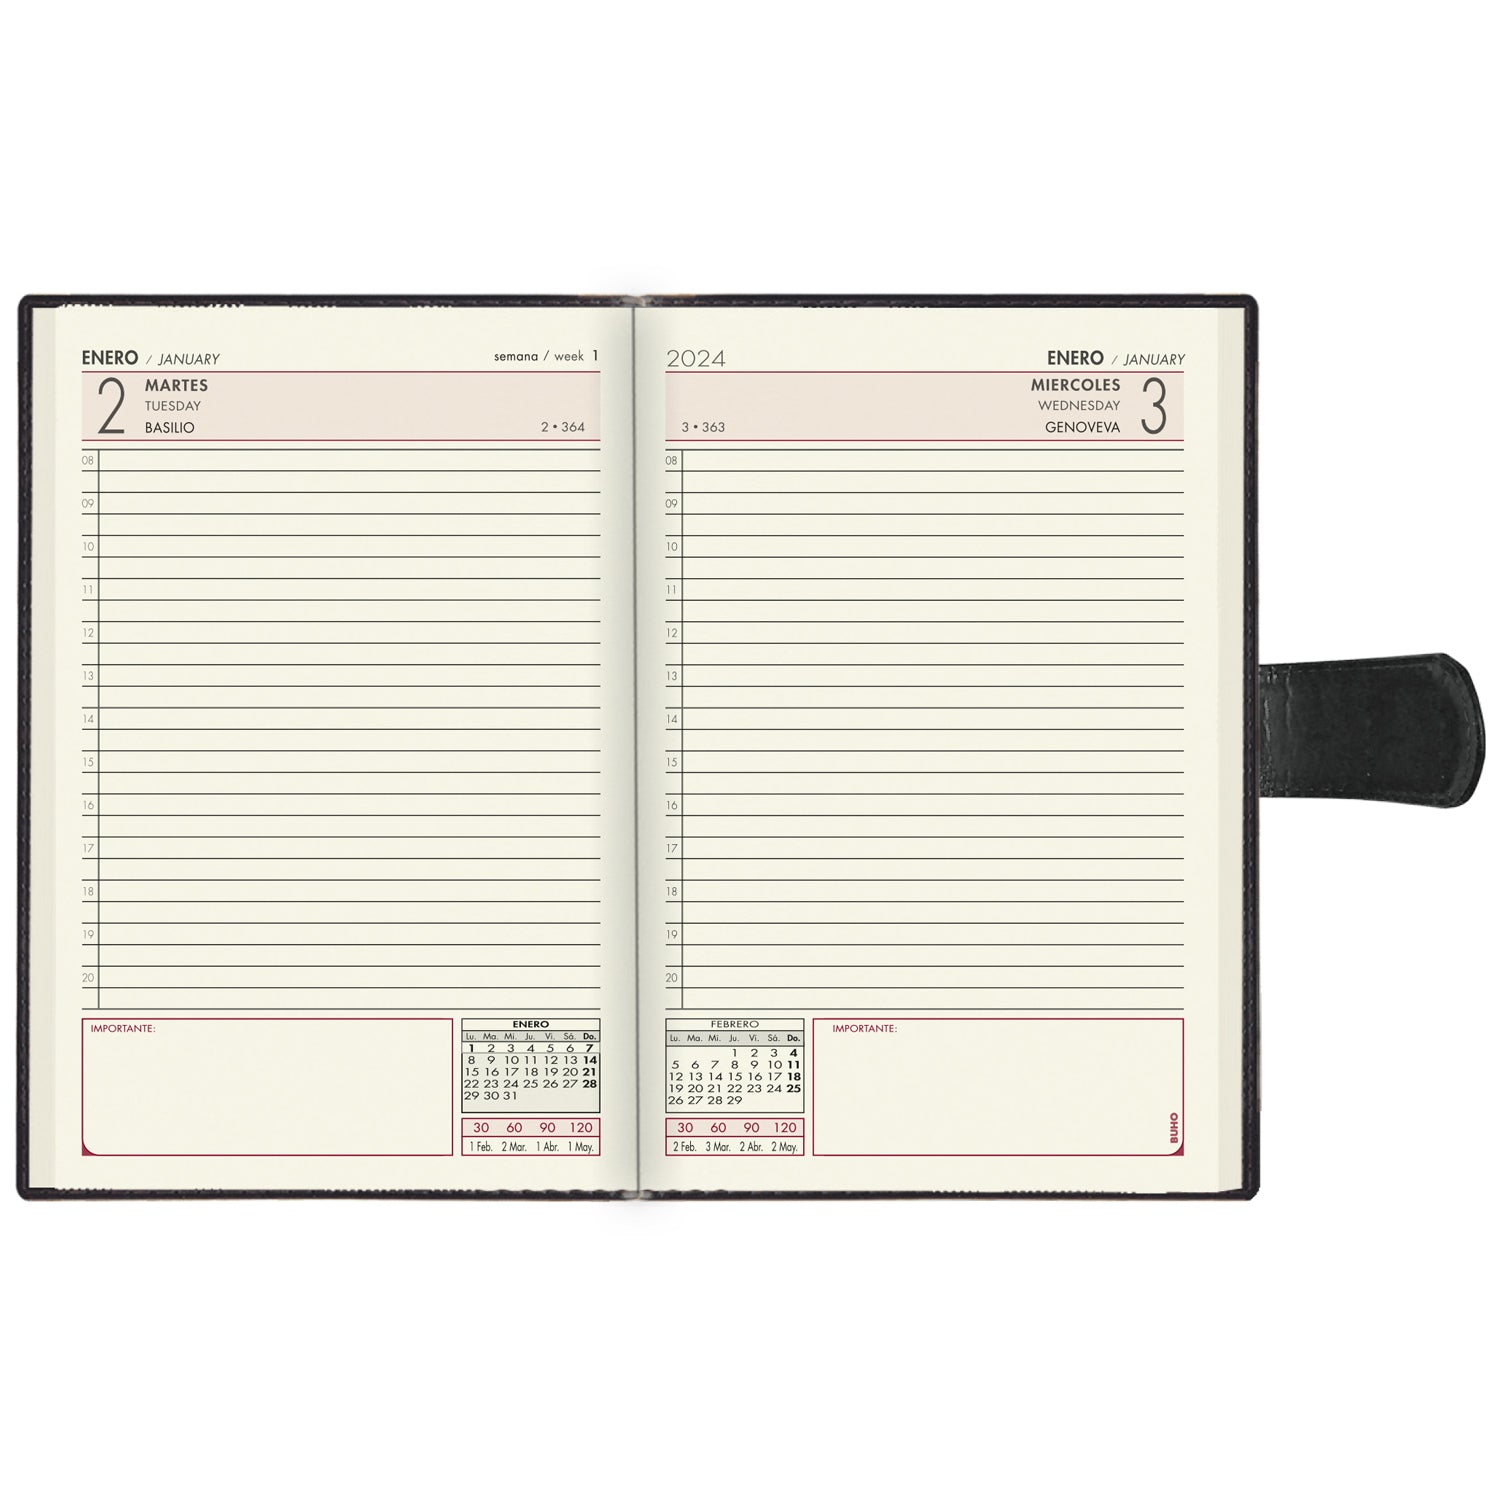 AGENDA MANAGER SILVER